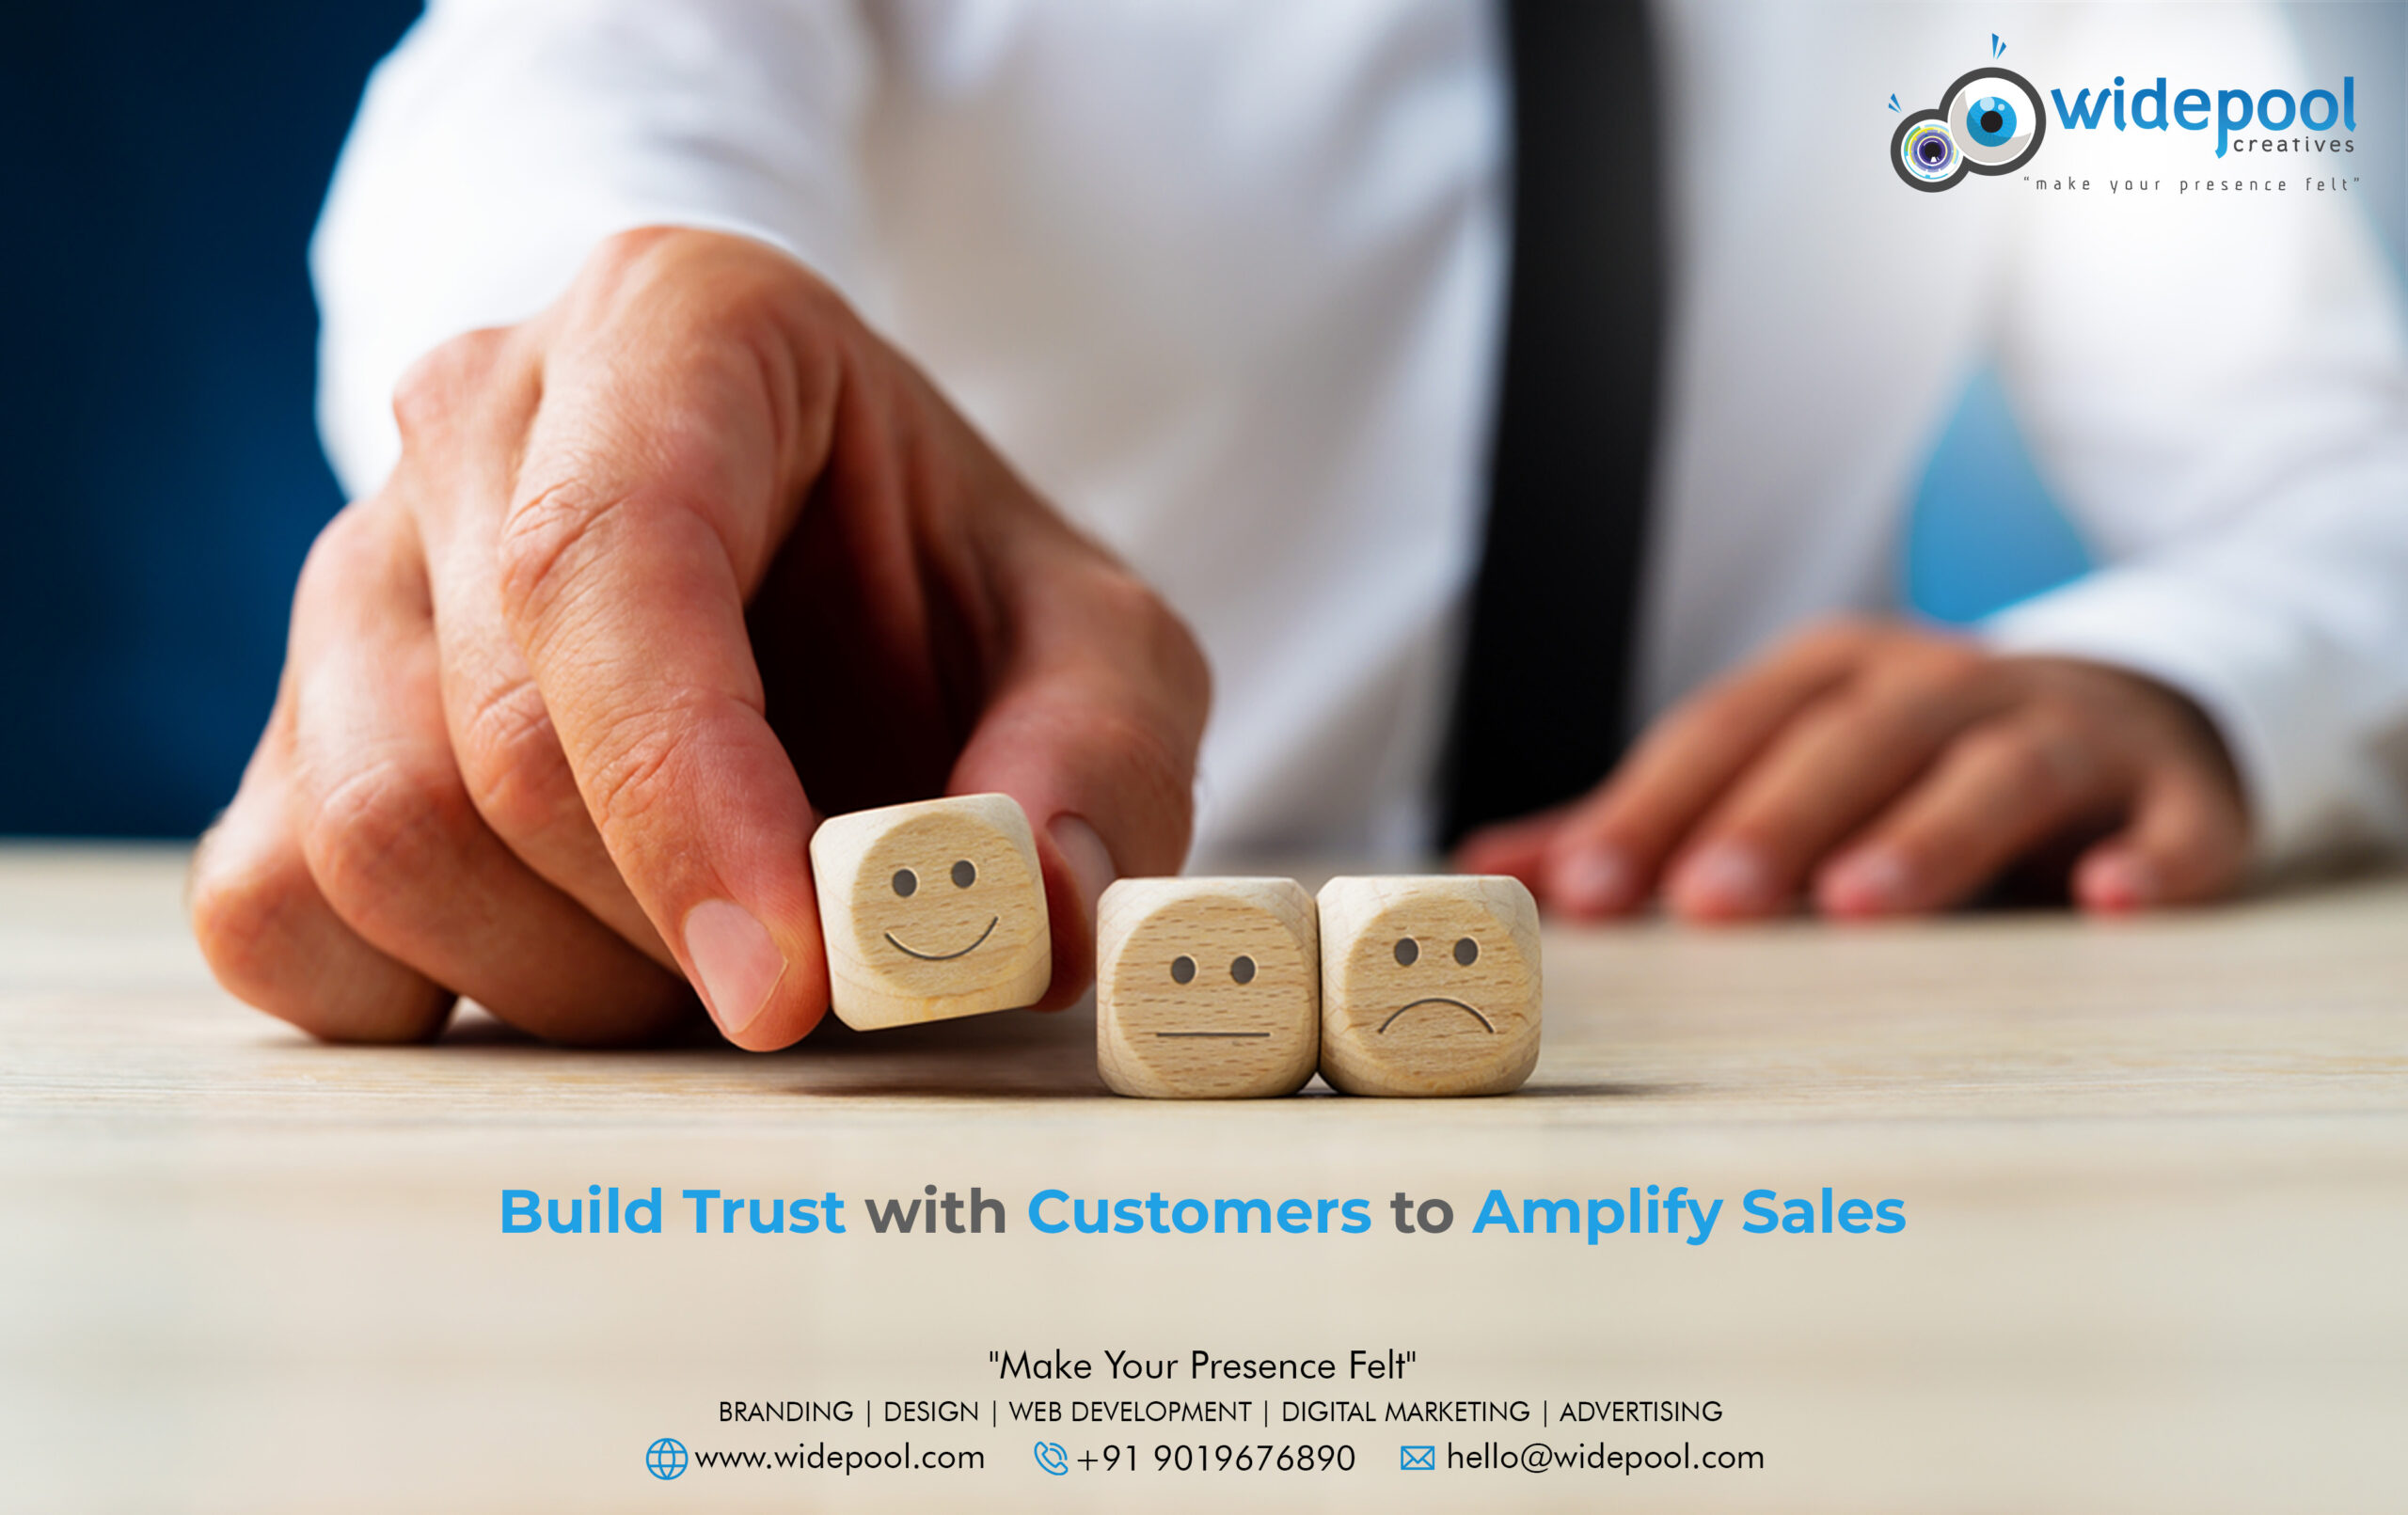 Build Trust with Customers to Amplify Sales